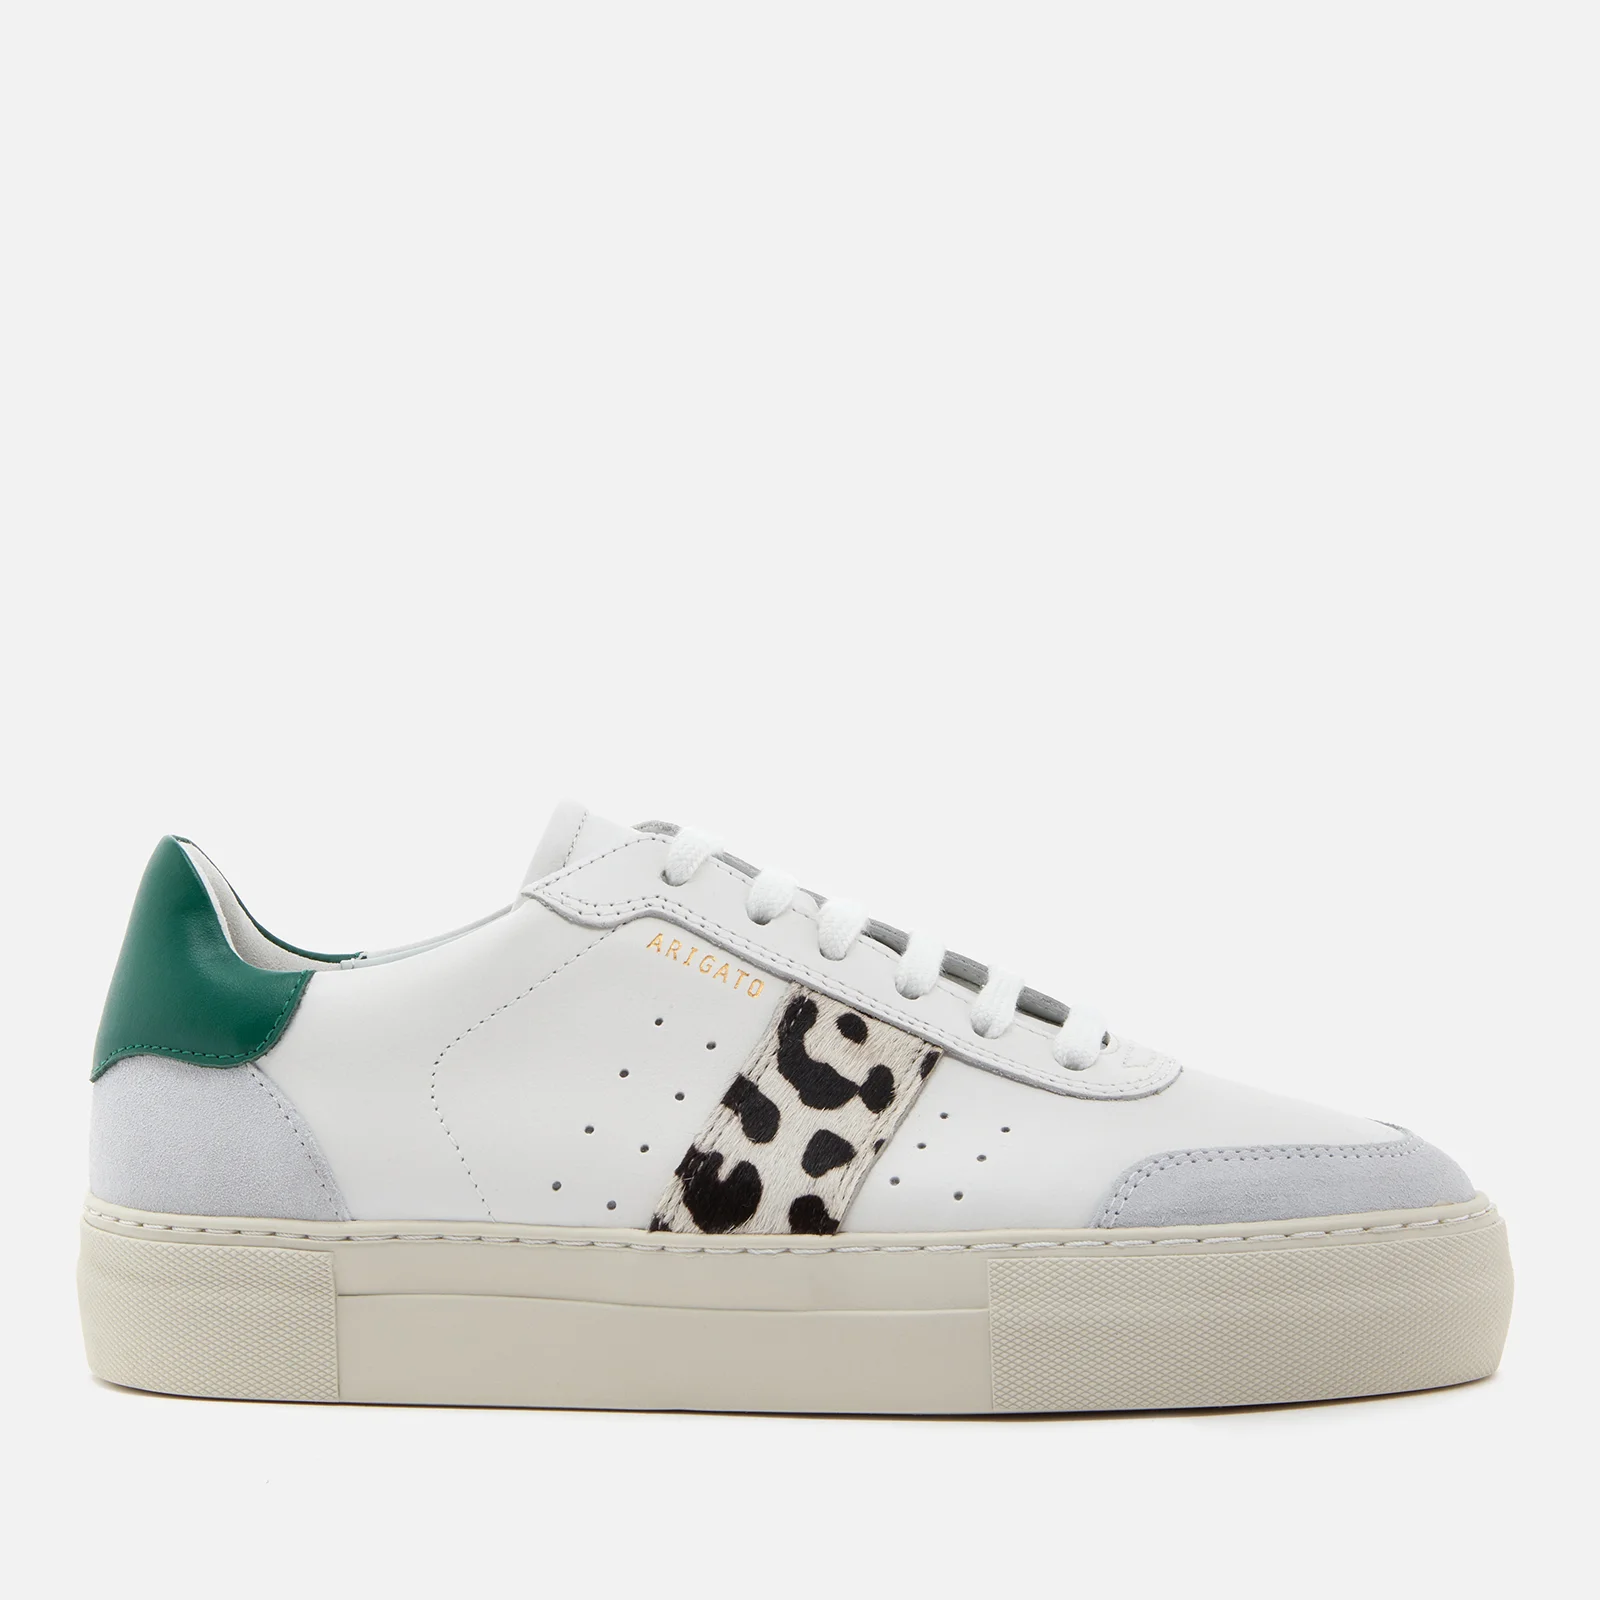 Axel Arigato Women's Platform V2 Leather Trainers - White/Leopard/Green Image 1